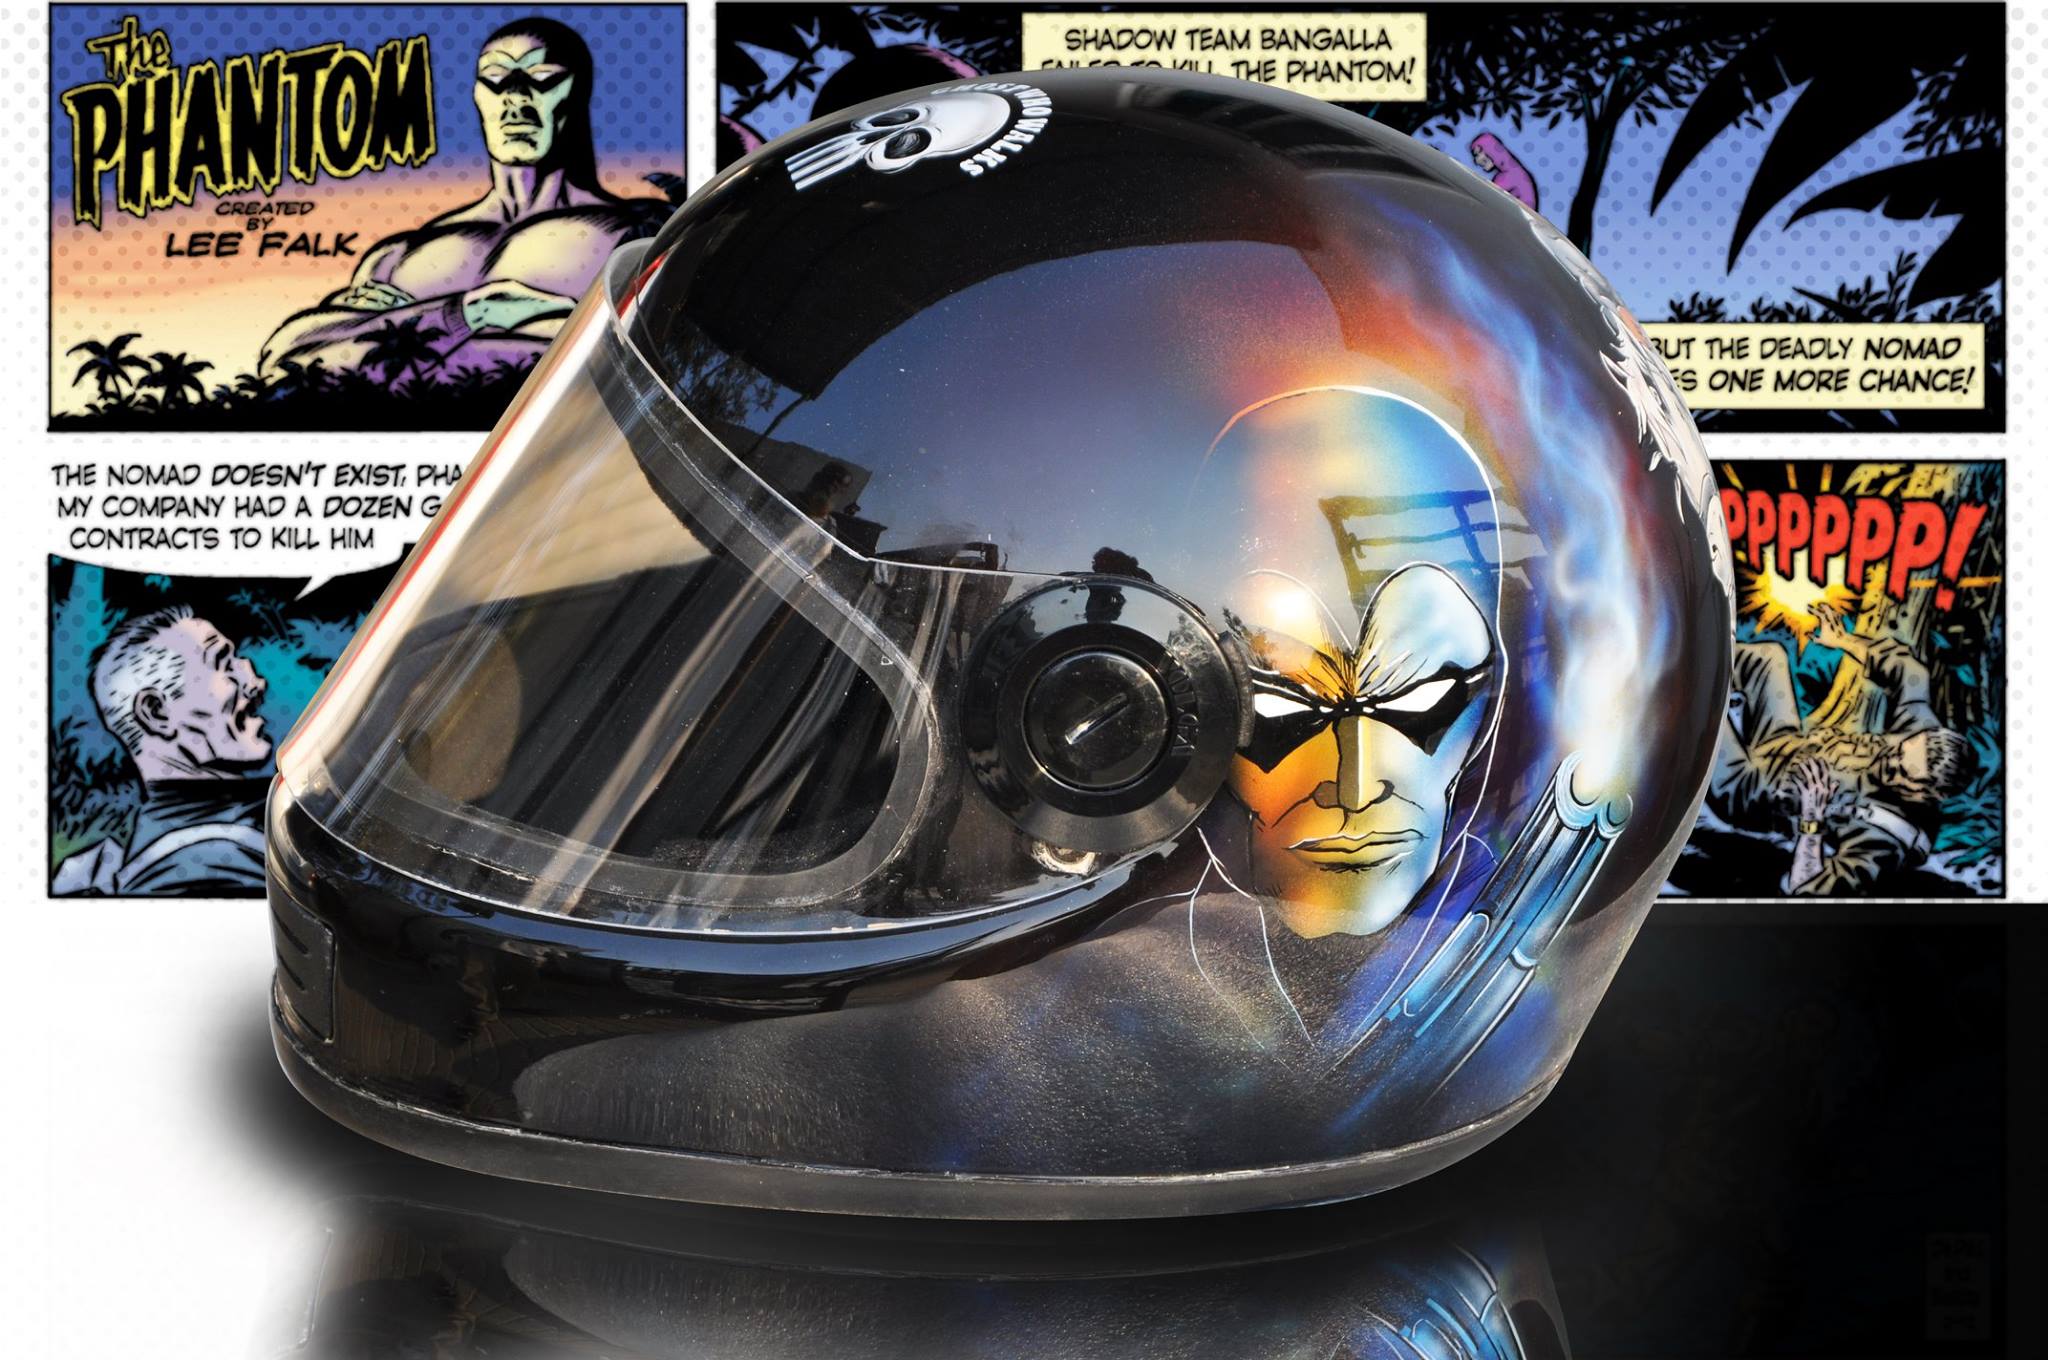 Top 10 Helmets by EIMOR - Black Panther, Breathe, The Lady Rider, Phantom, Captain America & More! - midground